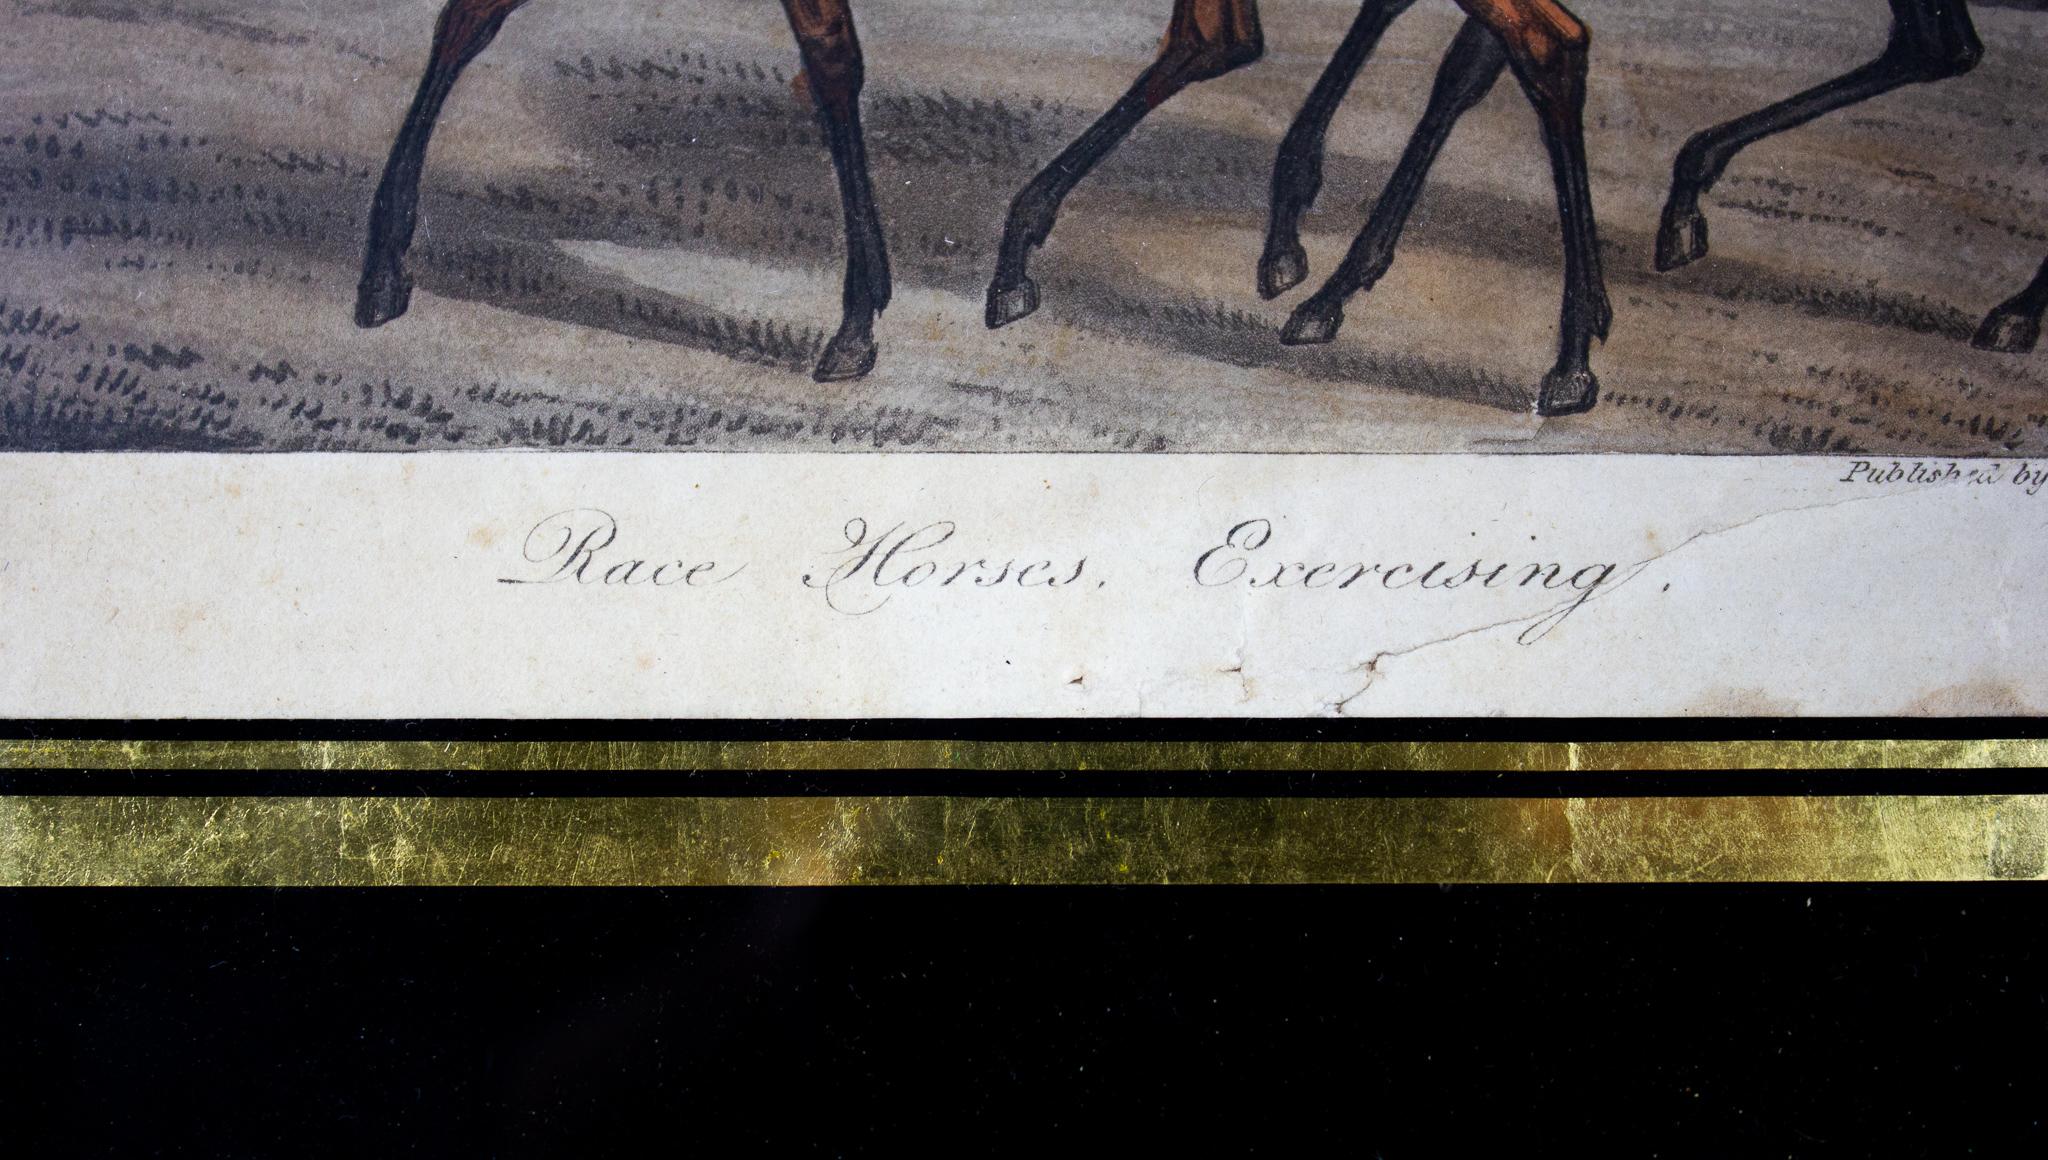 Sporting Art “Race Horses. Exercising” Figurative Print on Paper, 19th Century, Animal, Horse For Sale